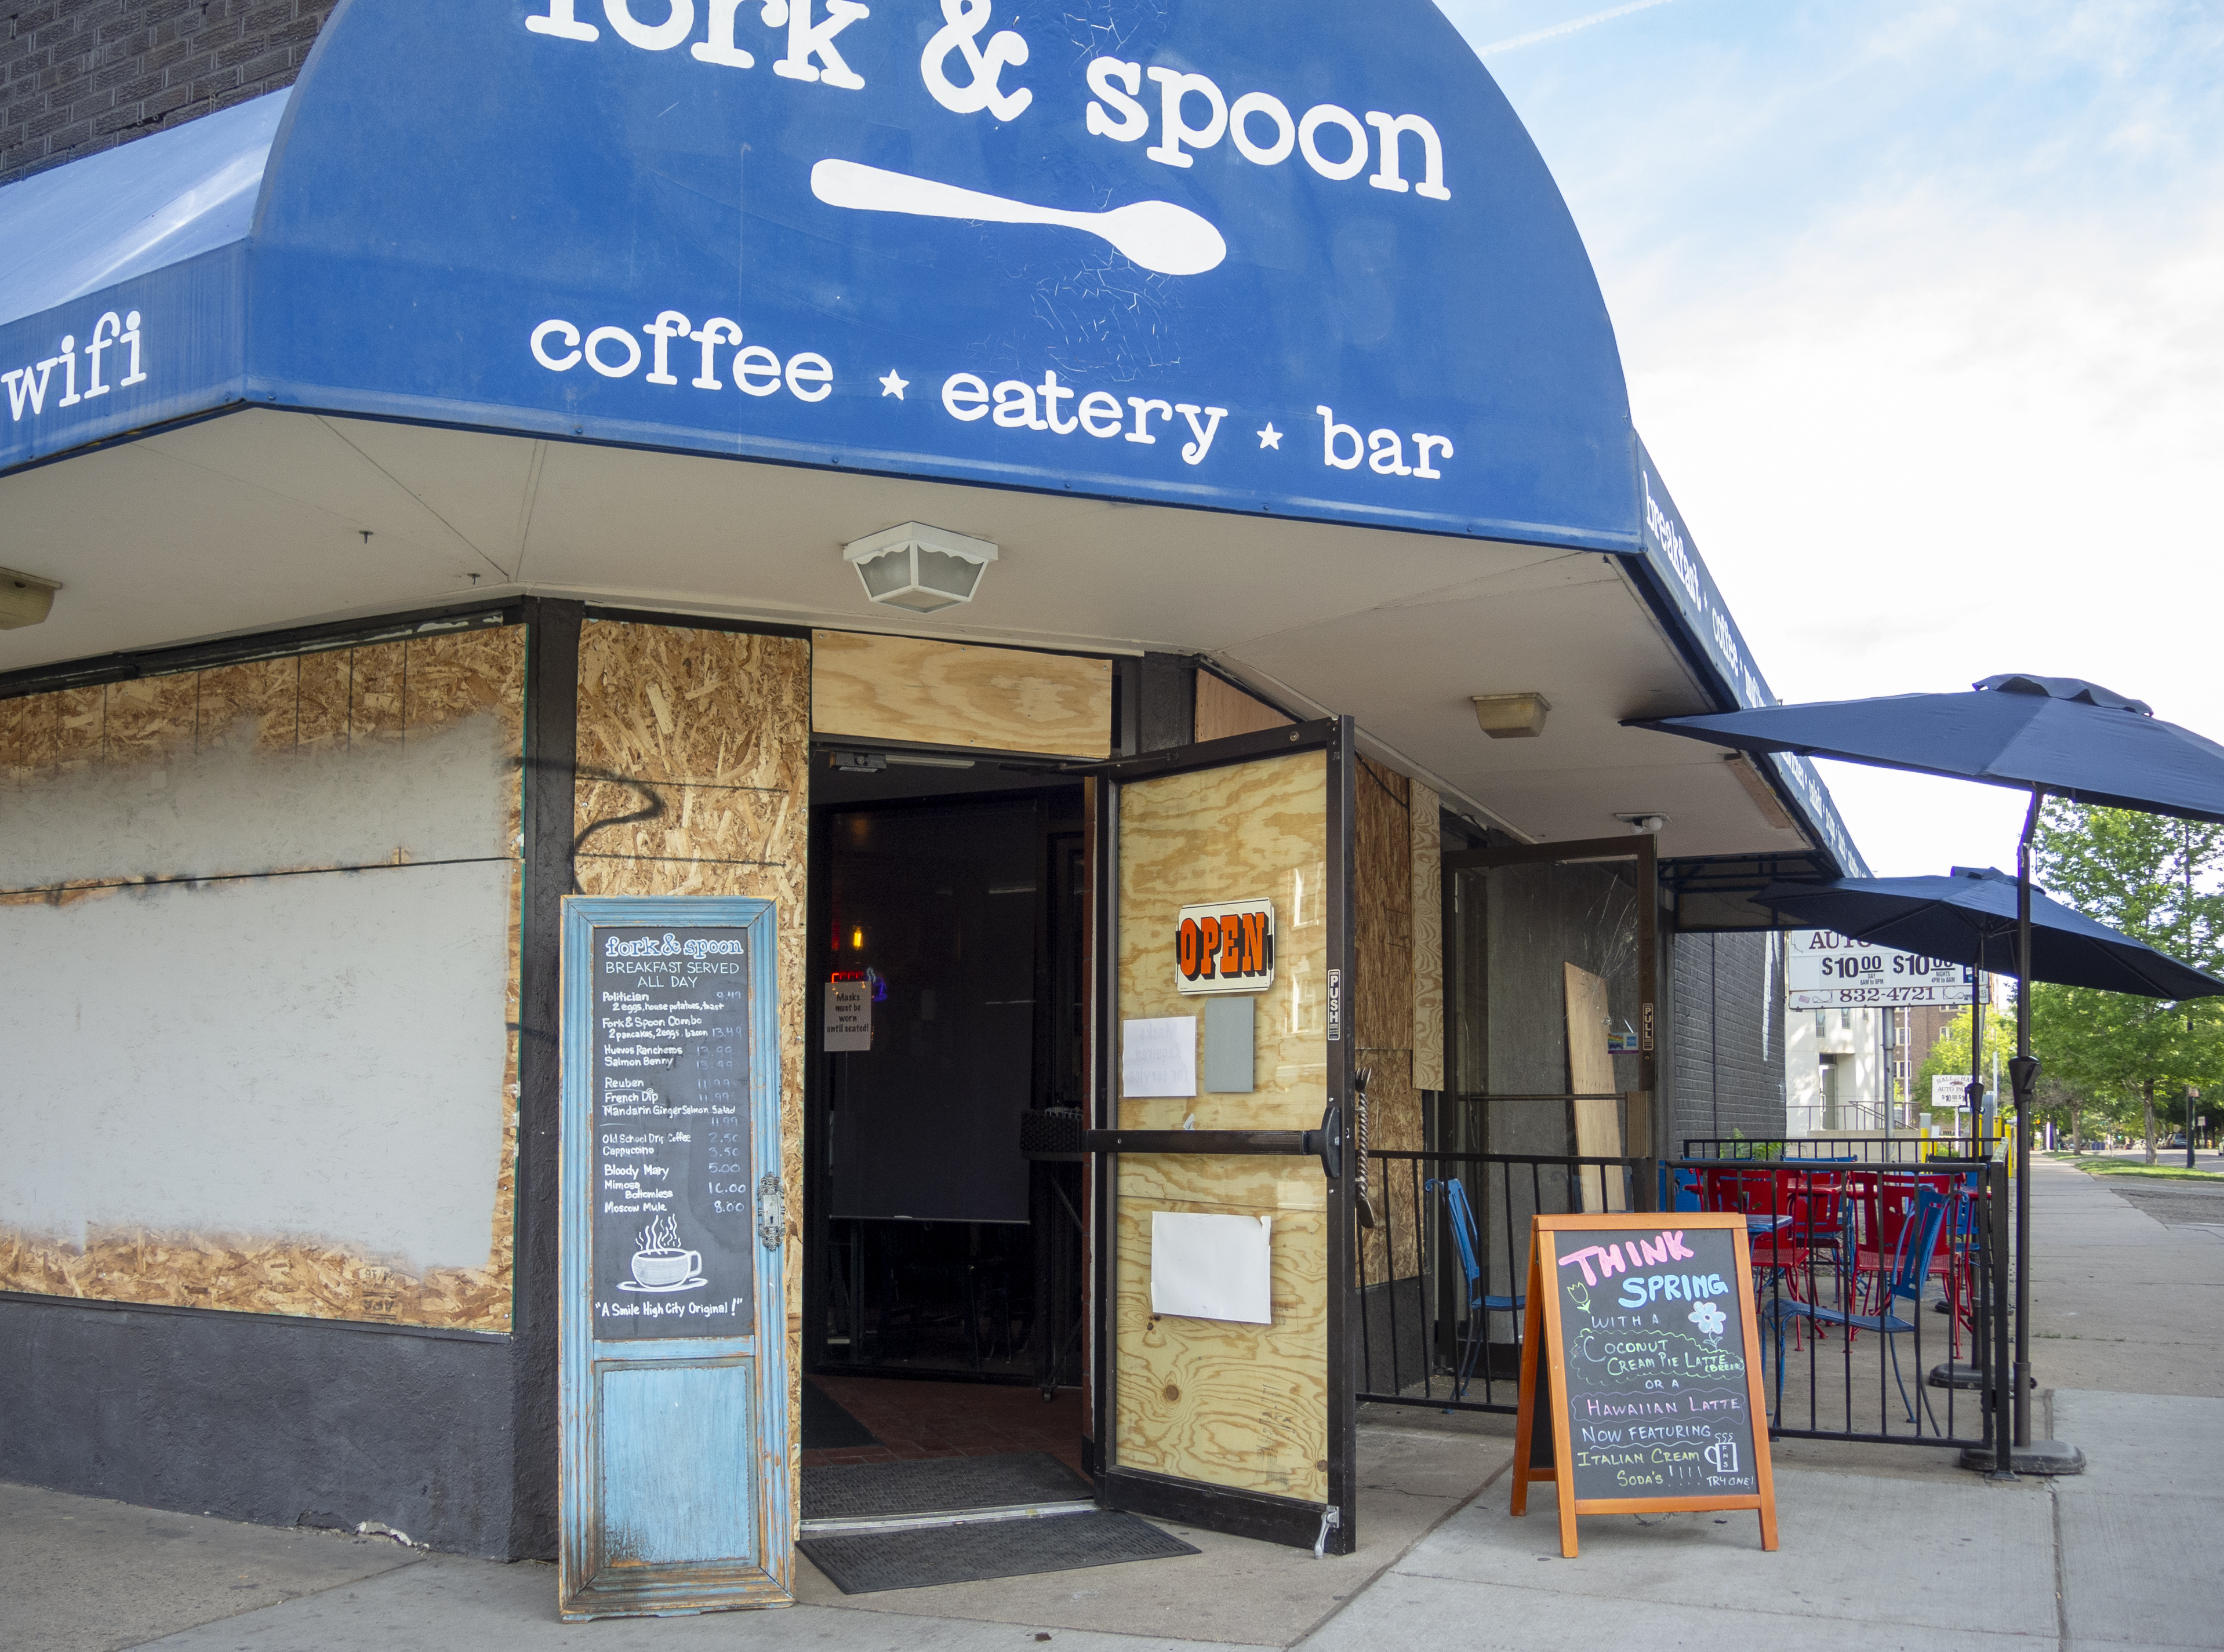 Photo of an eatery in Denver called fork & spoon. Their front door is open, but their windows are boarded up as they had been closed due to the pandemic lockdown. There are a few tables set up on the sidewalk for outdoor dining, and a sign posted inside the front door says "Masks must be worn until seated!"